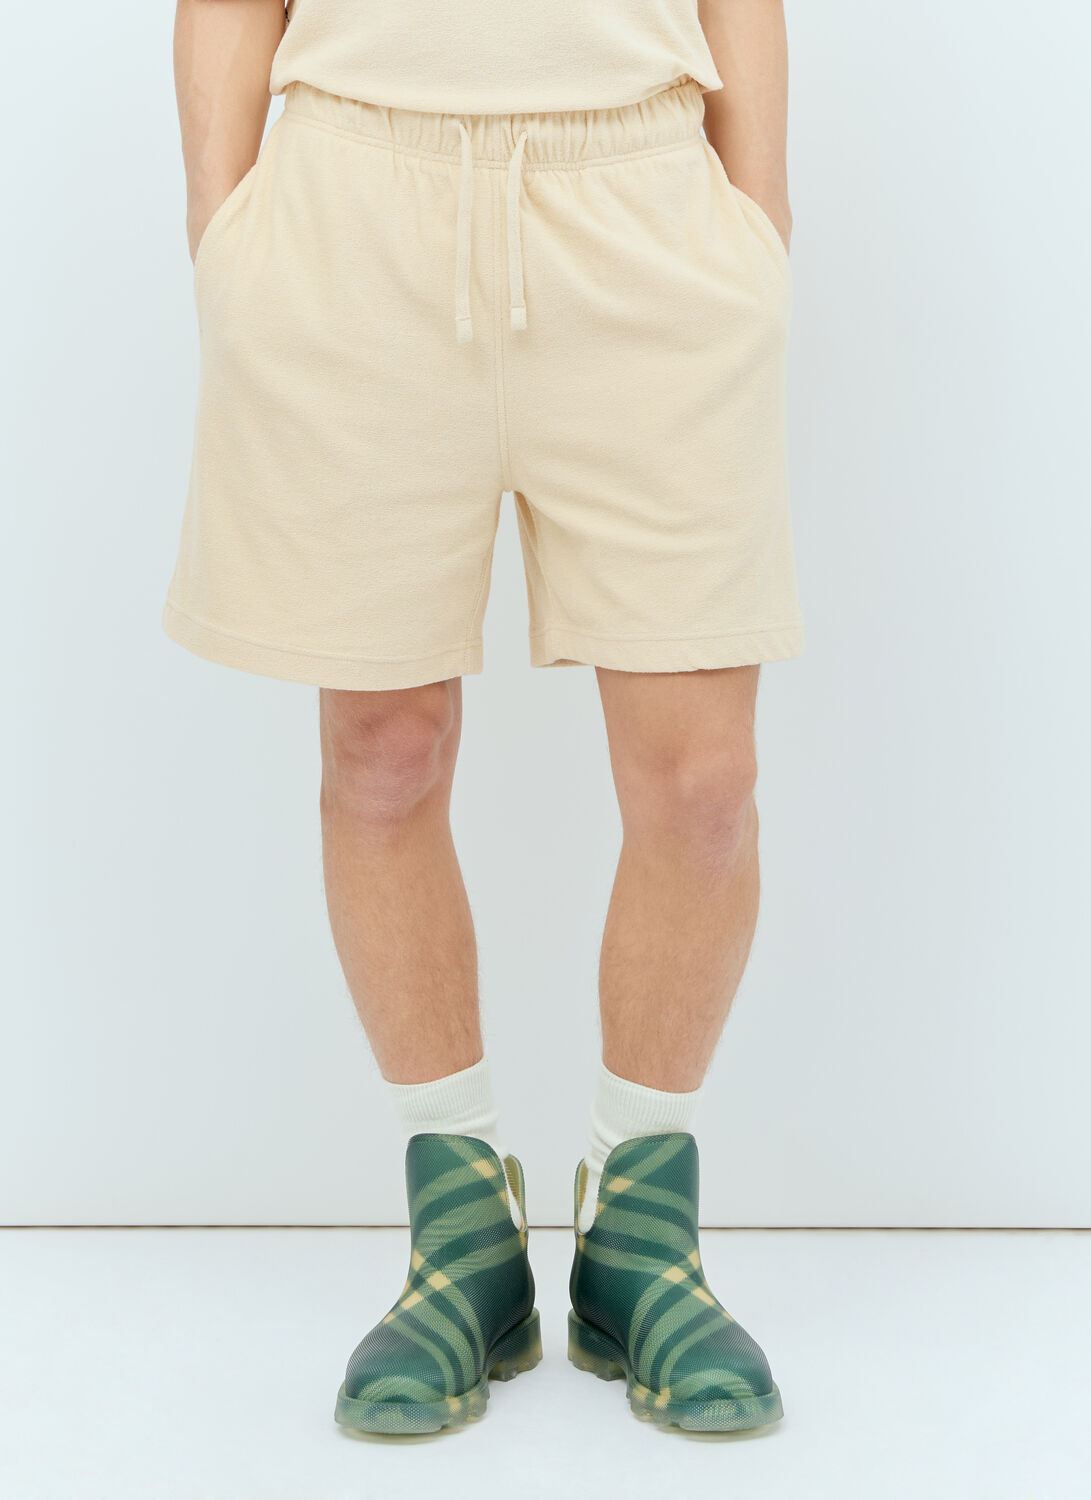 BURBERRY COTTON TOWELLING SHORTS